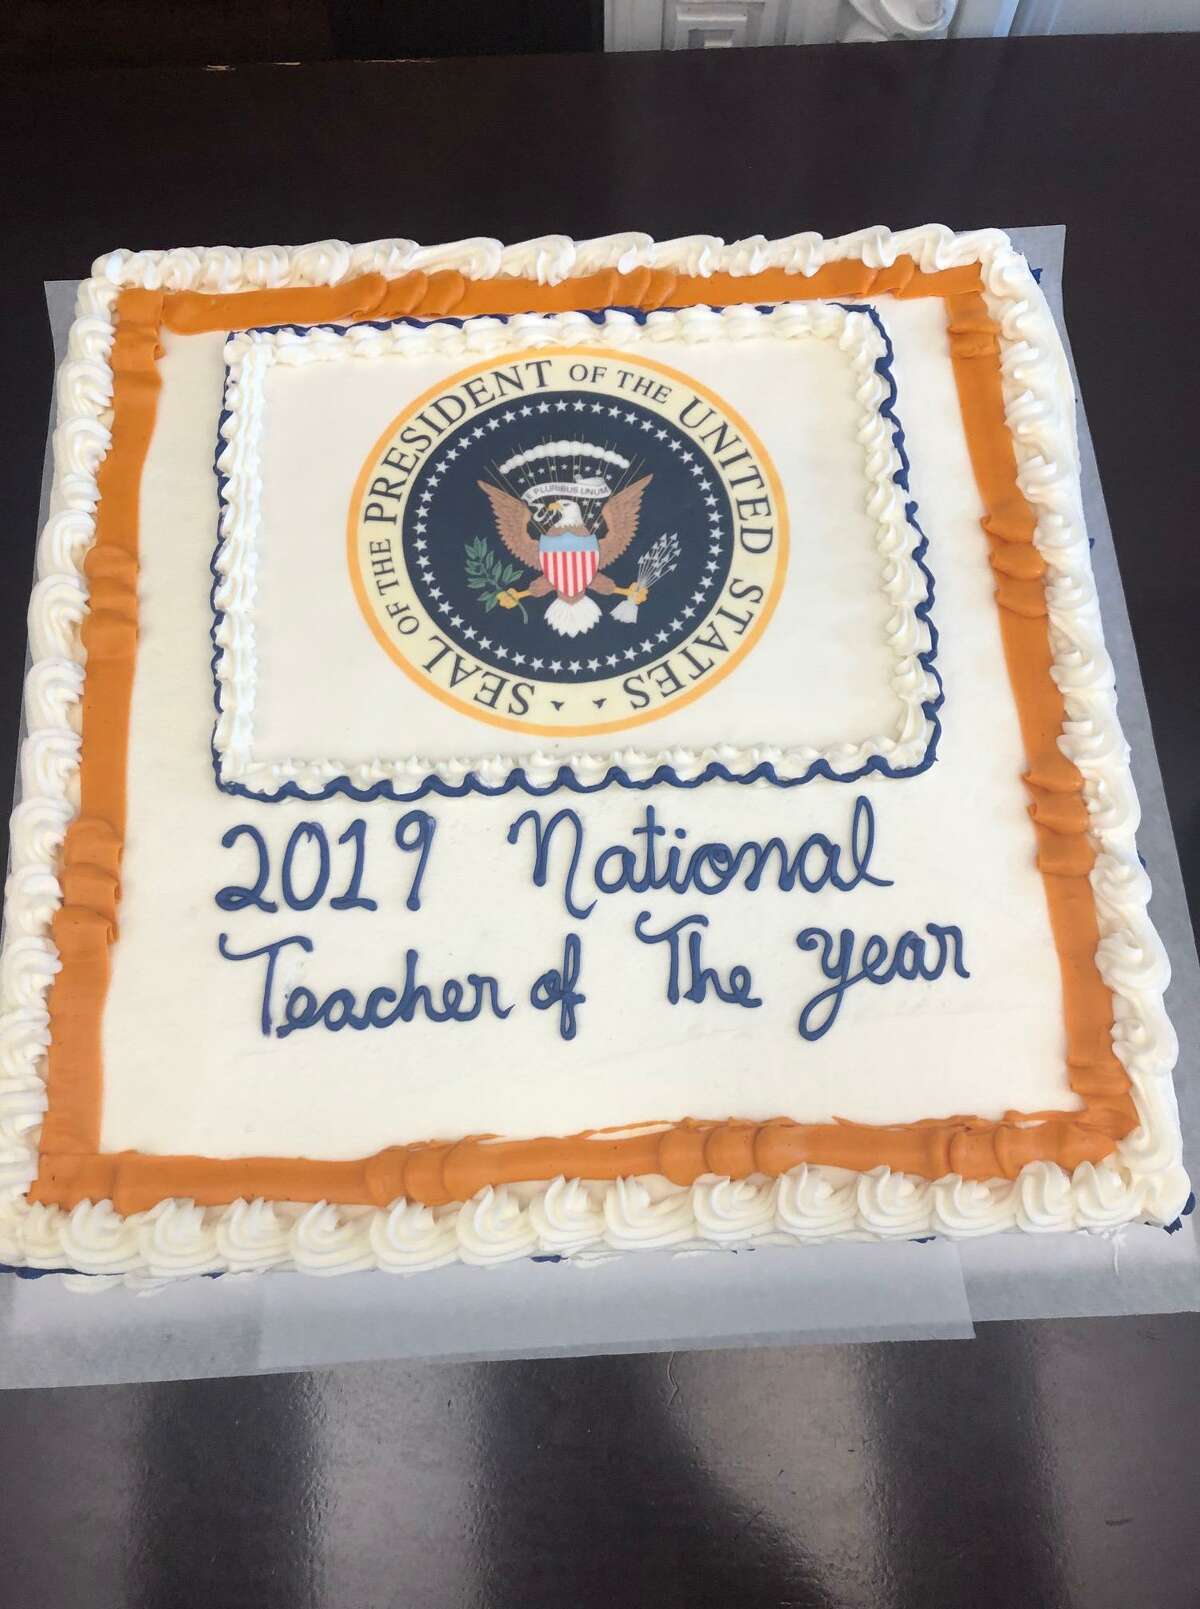 The cake at the National Teacher of the Year ceremony in Washington D.C. April 29, 2019